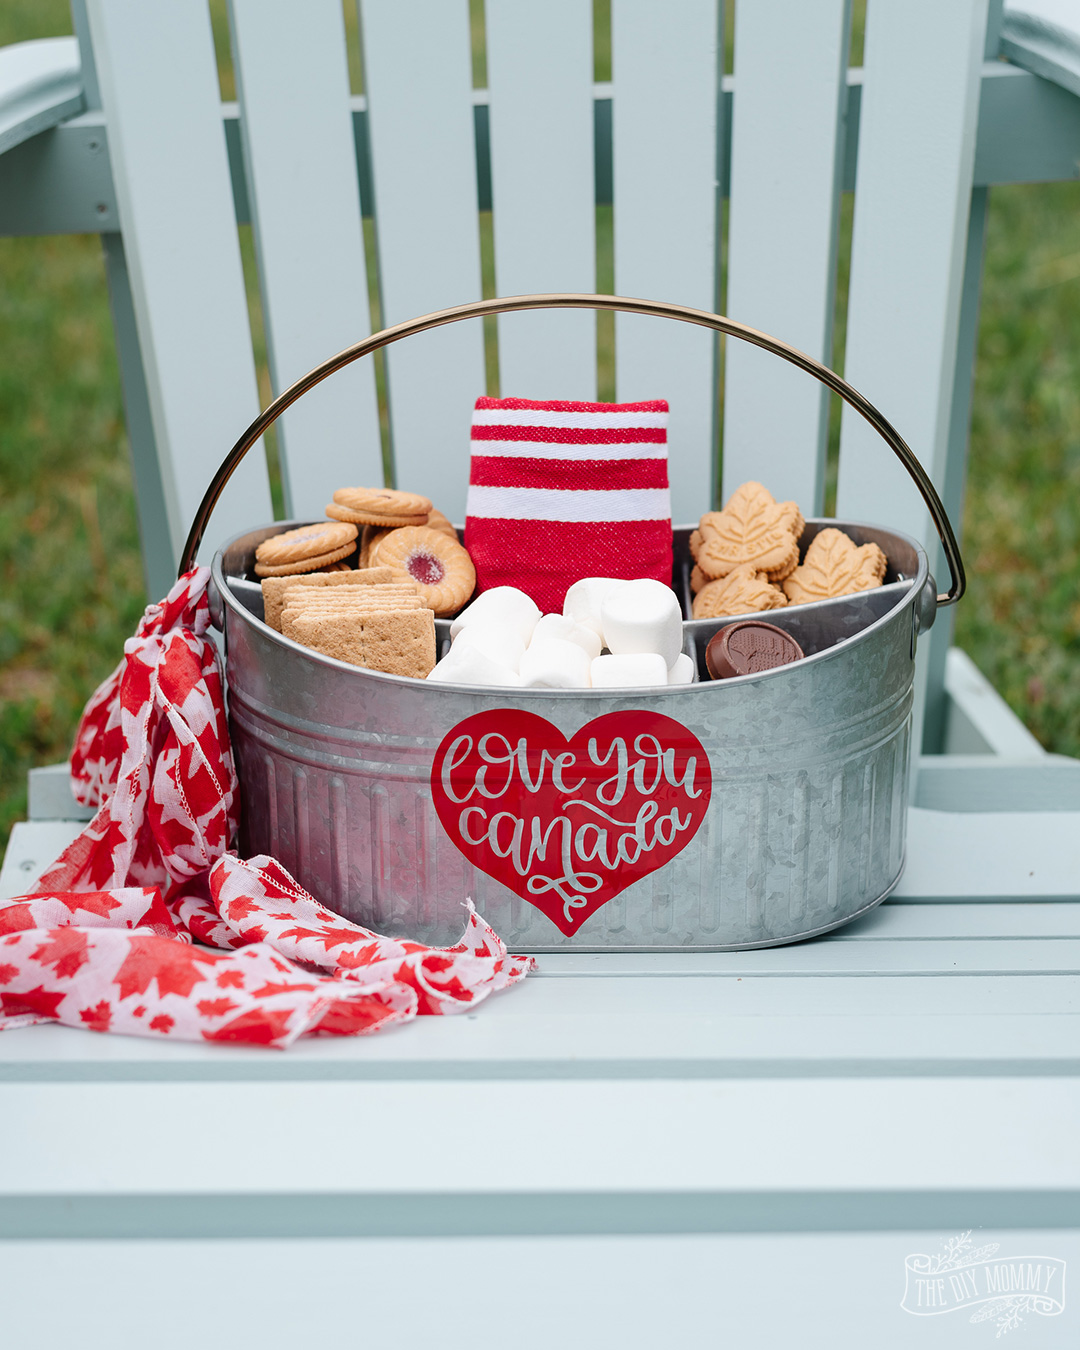 Learn how to make this DIY s'mores caddy that's perfect for a Canada Day celebration. It can also be customized to suit any celebration!